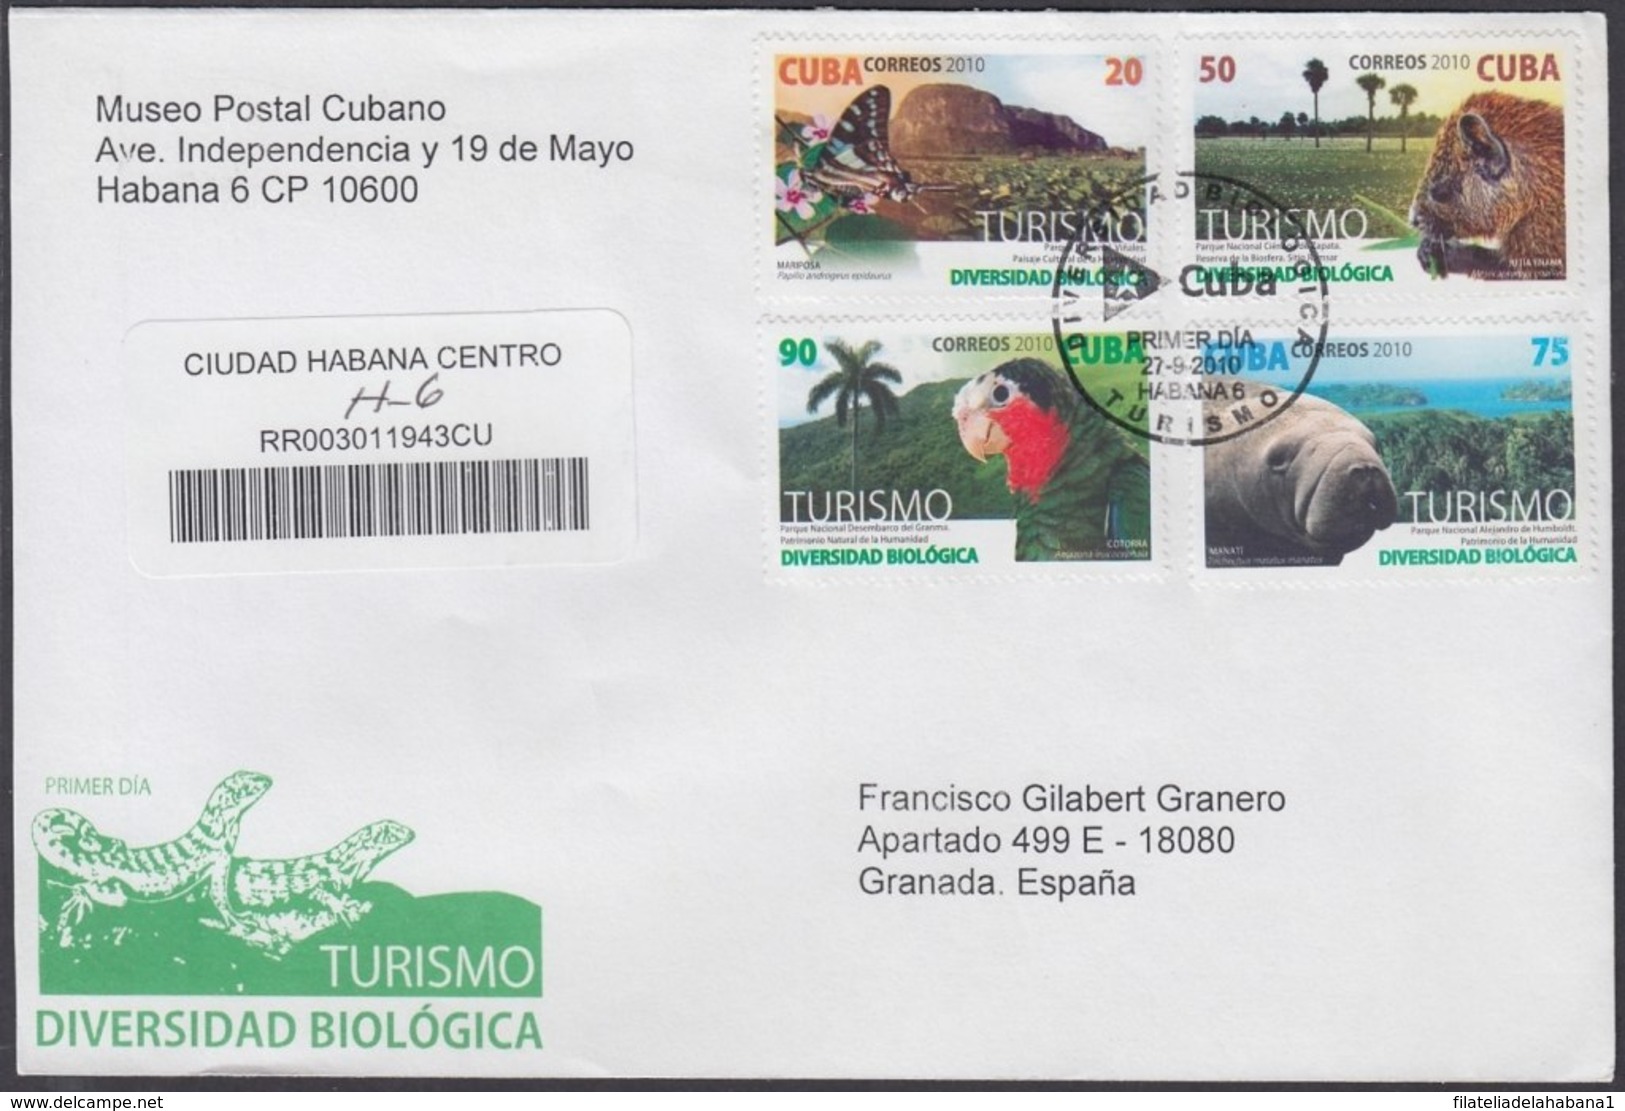 2010-FDC-82 CUBA FDC 2010. REGISTERED COVER TO SPAIN. DIVERSIDAD BIOLOGICA, TURISMO, BUTTERFLIES, MARIPOSAS, - FDC